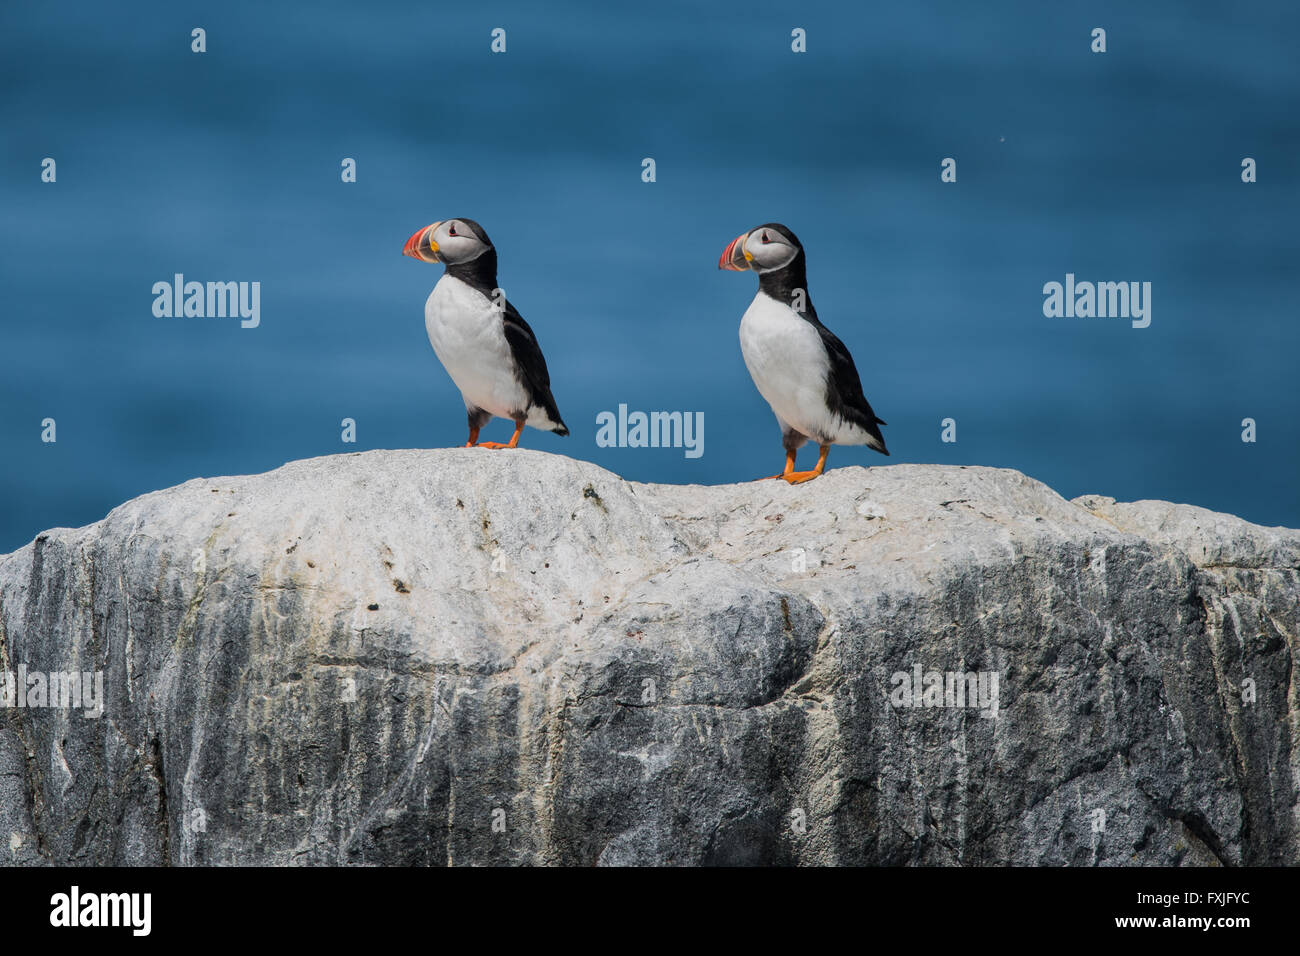 Profile Portrait of a Atlantic Puffin Pair Against a Blue Background Stock Photo